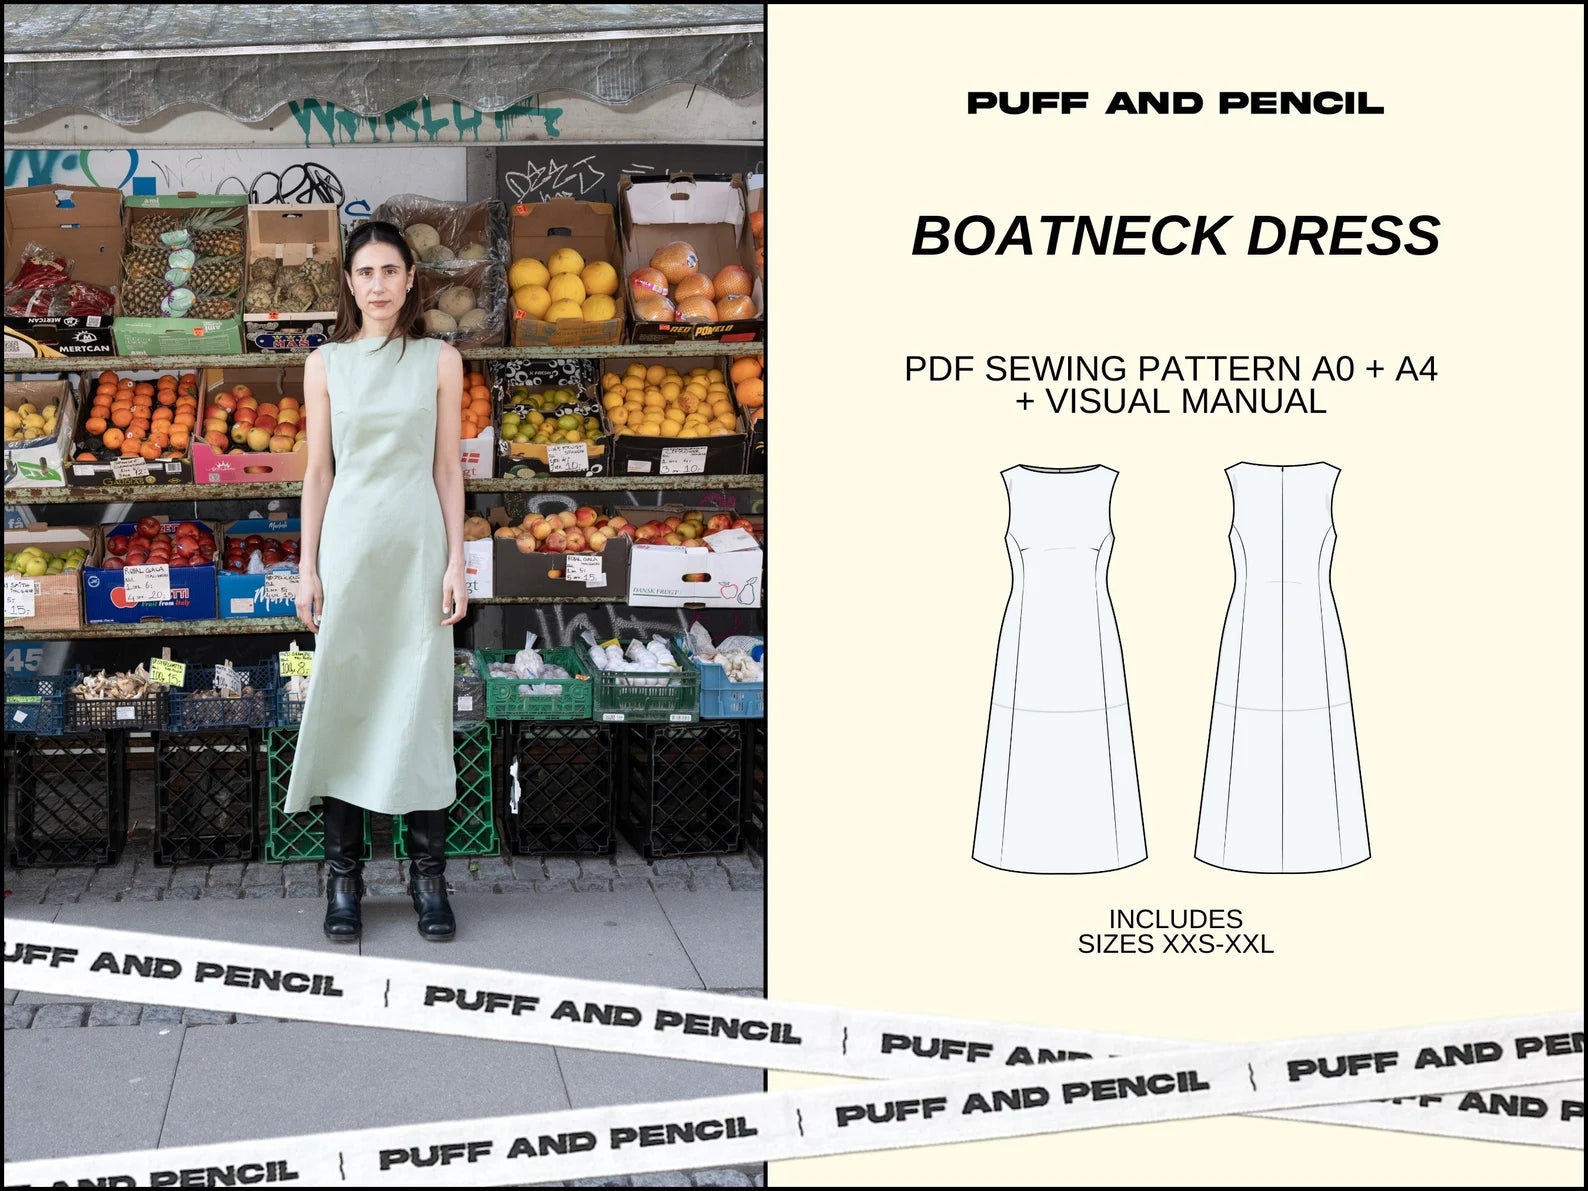 Puff and Pencil Boatneck Dress